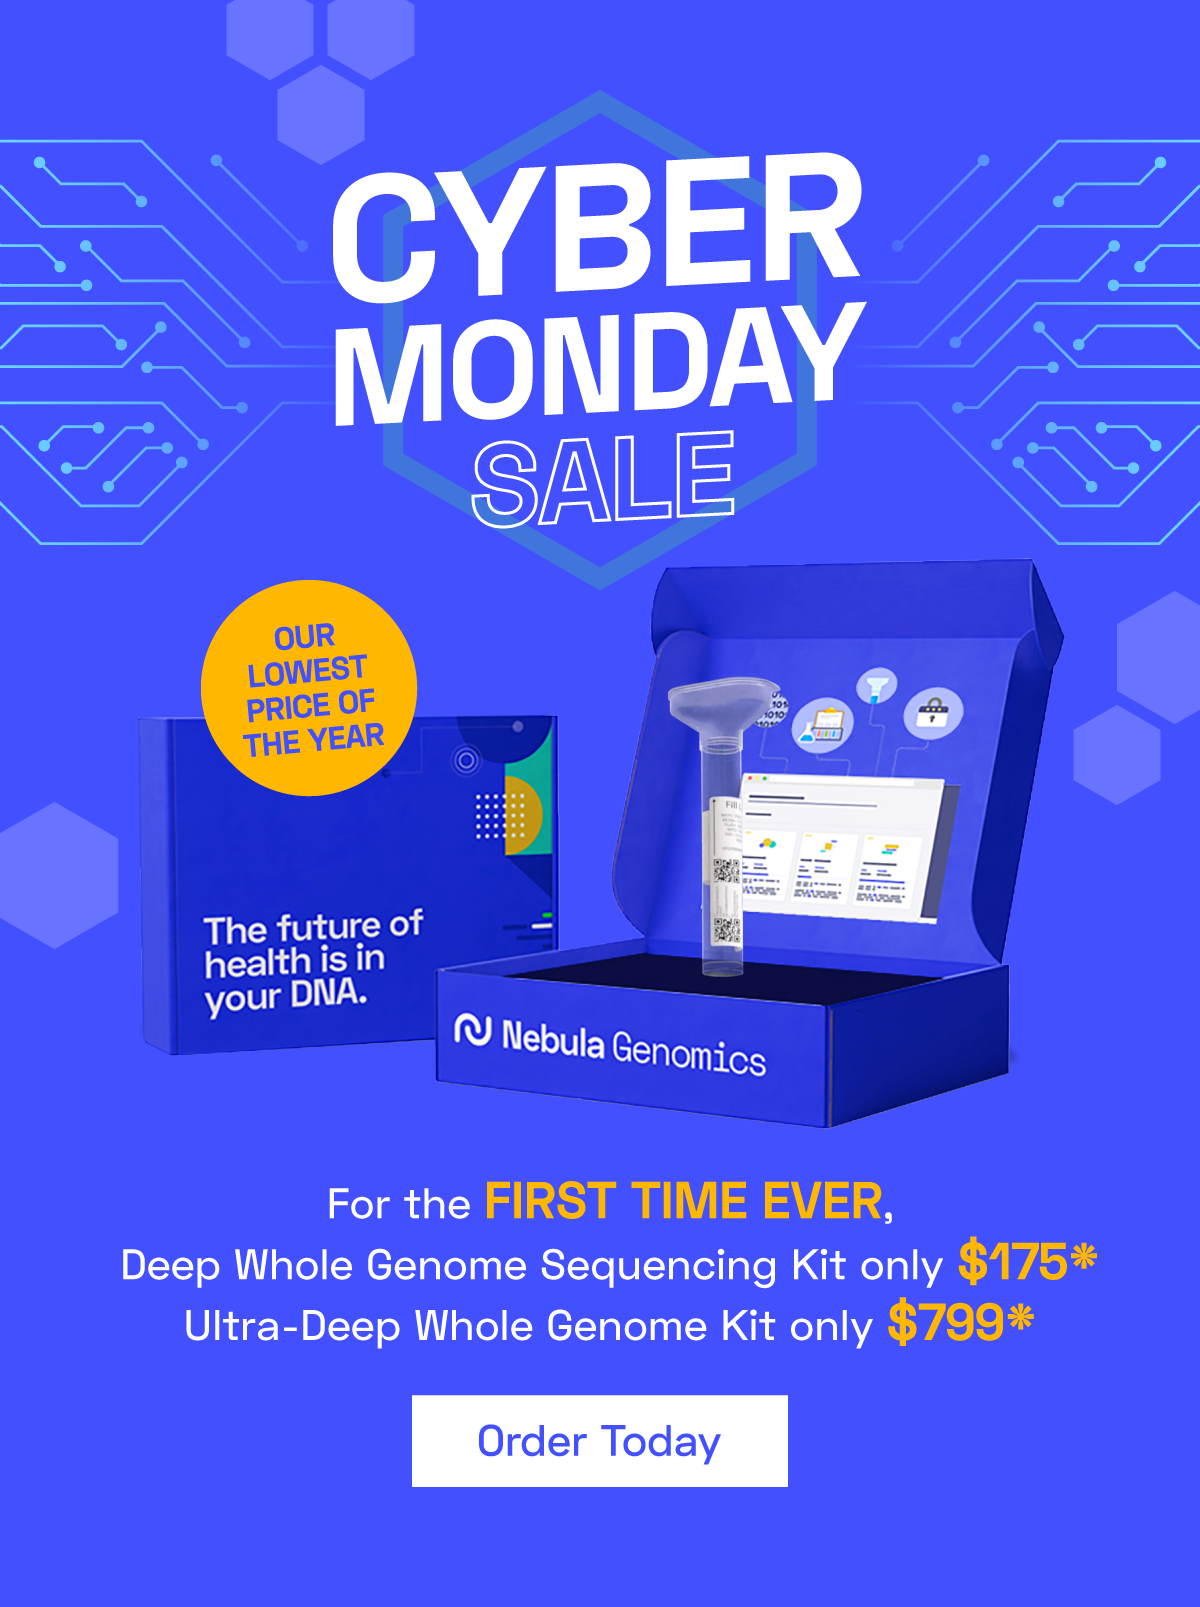 Cyber Monday Sale: For the first time ever, get a Deep Whole Genome Sequencing Kit for only $175* or the Ultra Deep Kit for $799*. Order Today